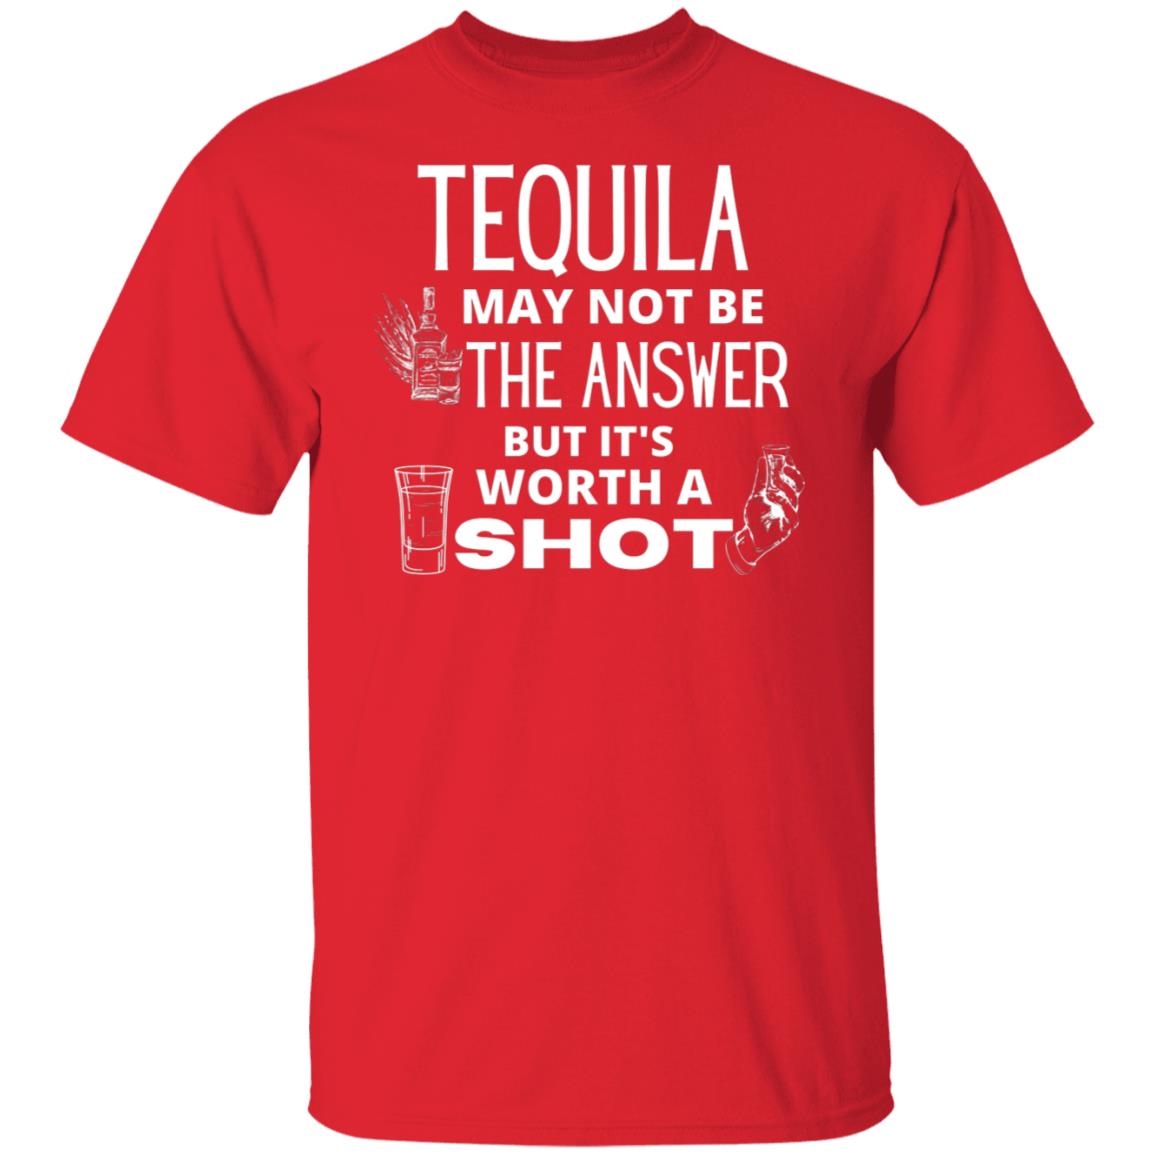 Tequila May Not Be the Answer But It's Worth A Shot Funny Tequila Party Shots Graphic Tee   T-Shirt